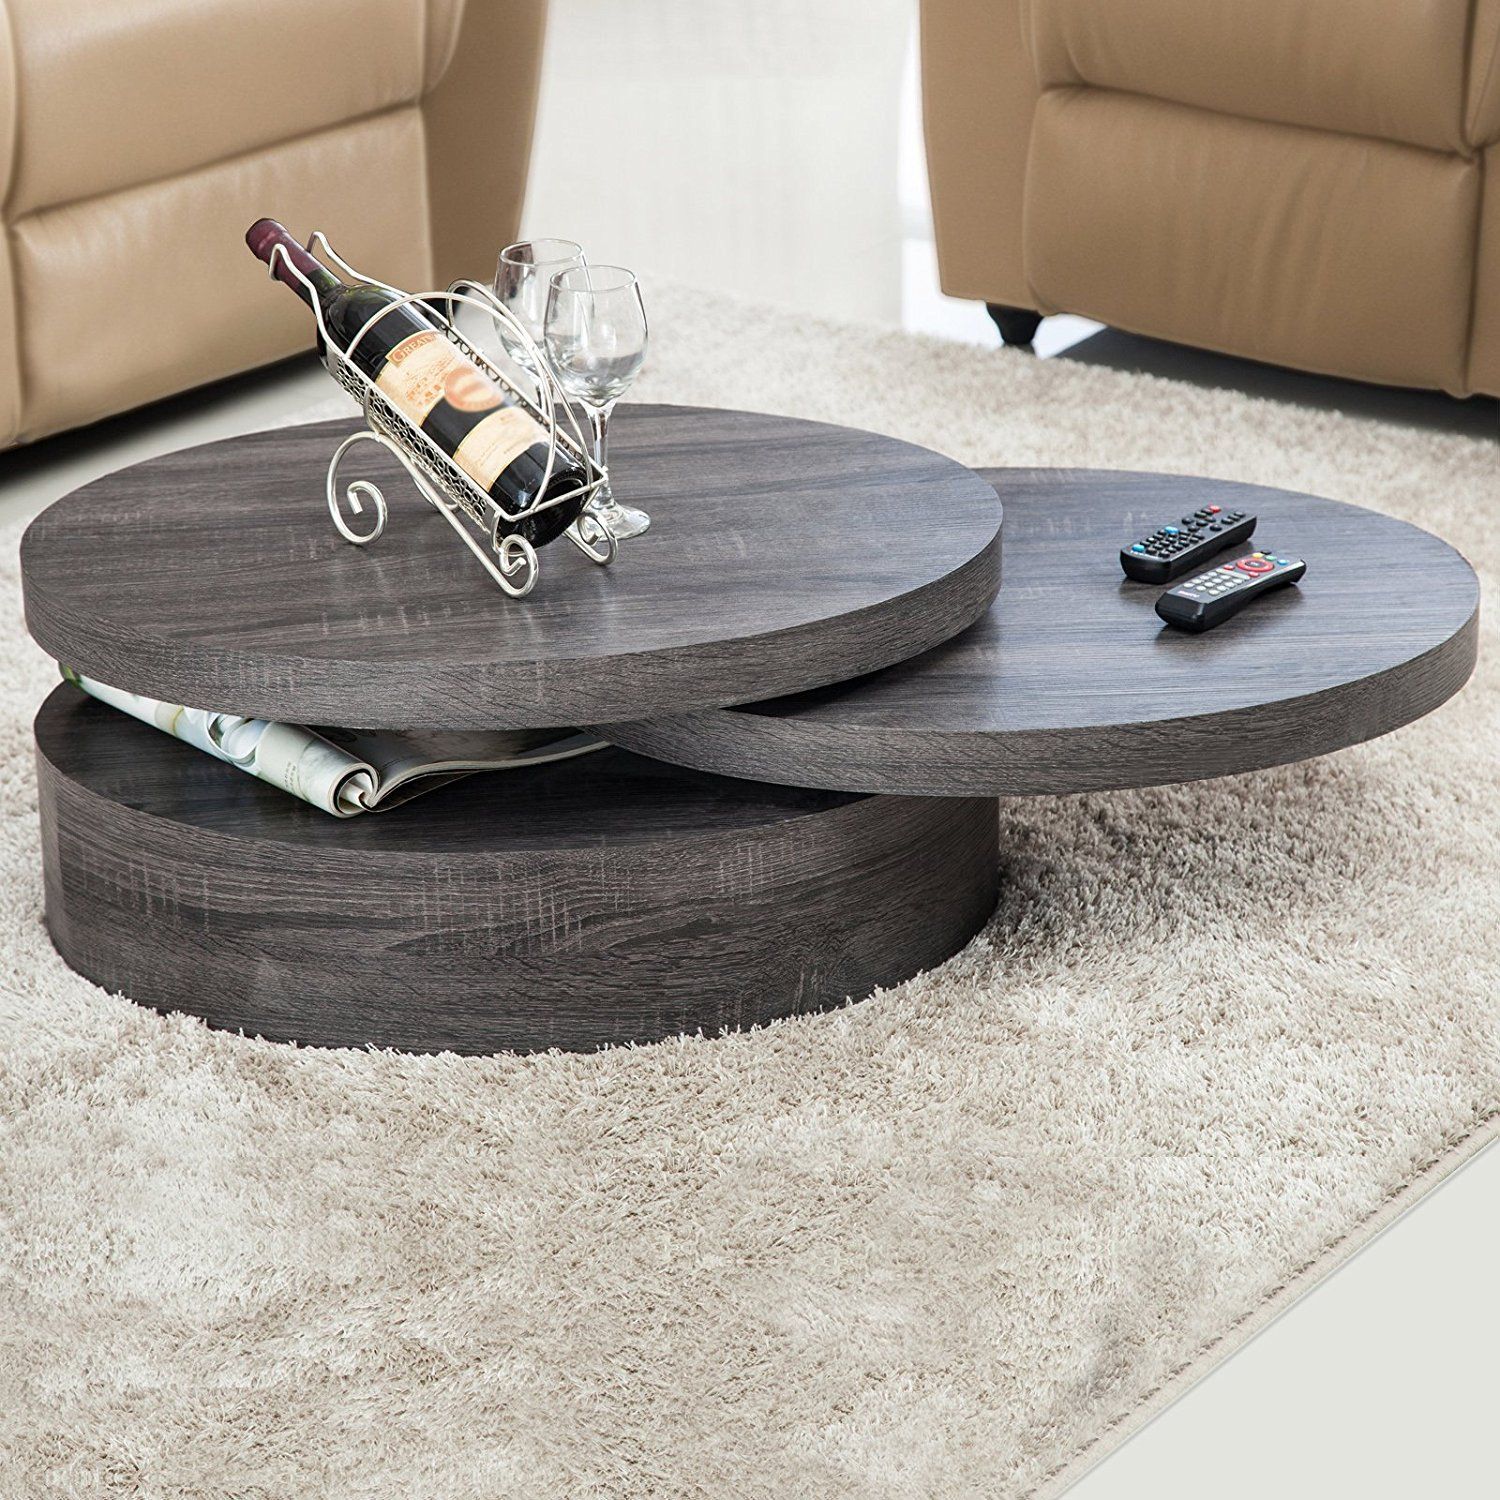 Suncoo Oak Round Rotating Wood Coffee Table With 3 Layers Home Living Room  Furniture | Coffee Table Wood, Coffee Table, Table Pertaining To Rotating Wood Coffee Tables (View 15 of 15)